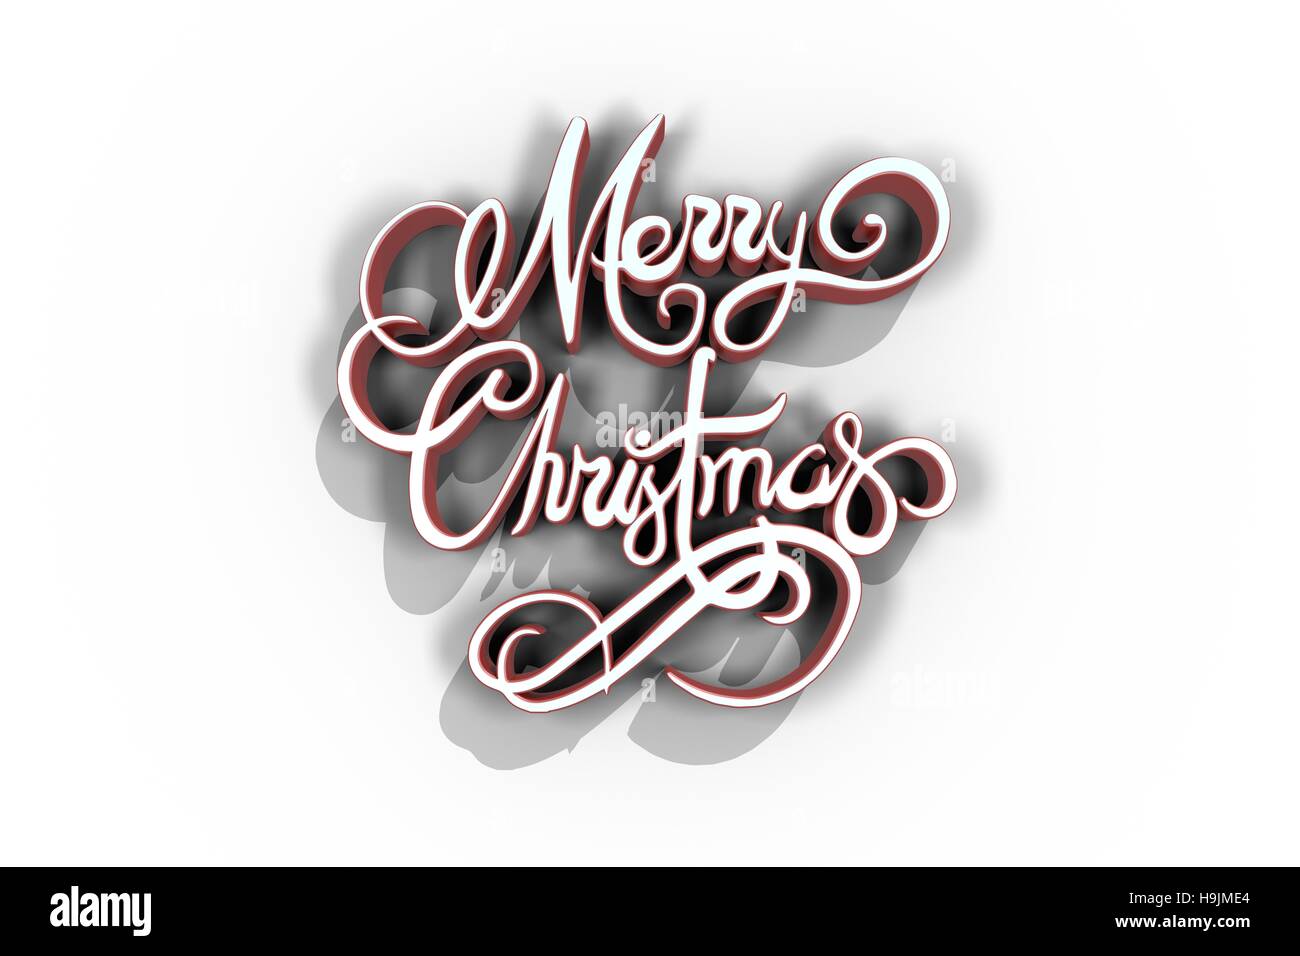 Three dimensional of Merry Christmas text in red and white color Stock Photo